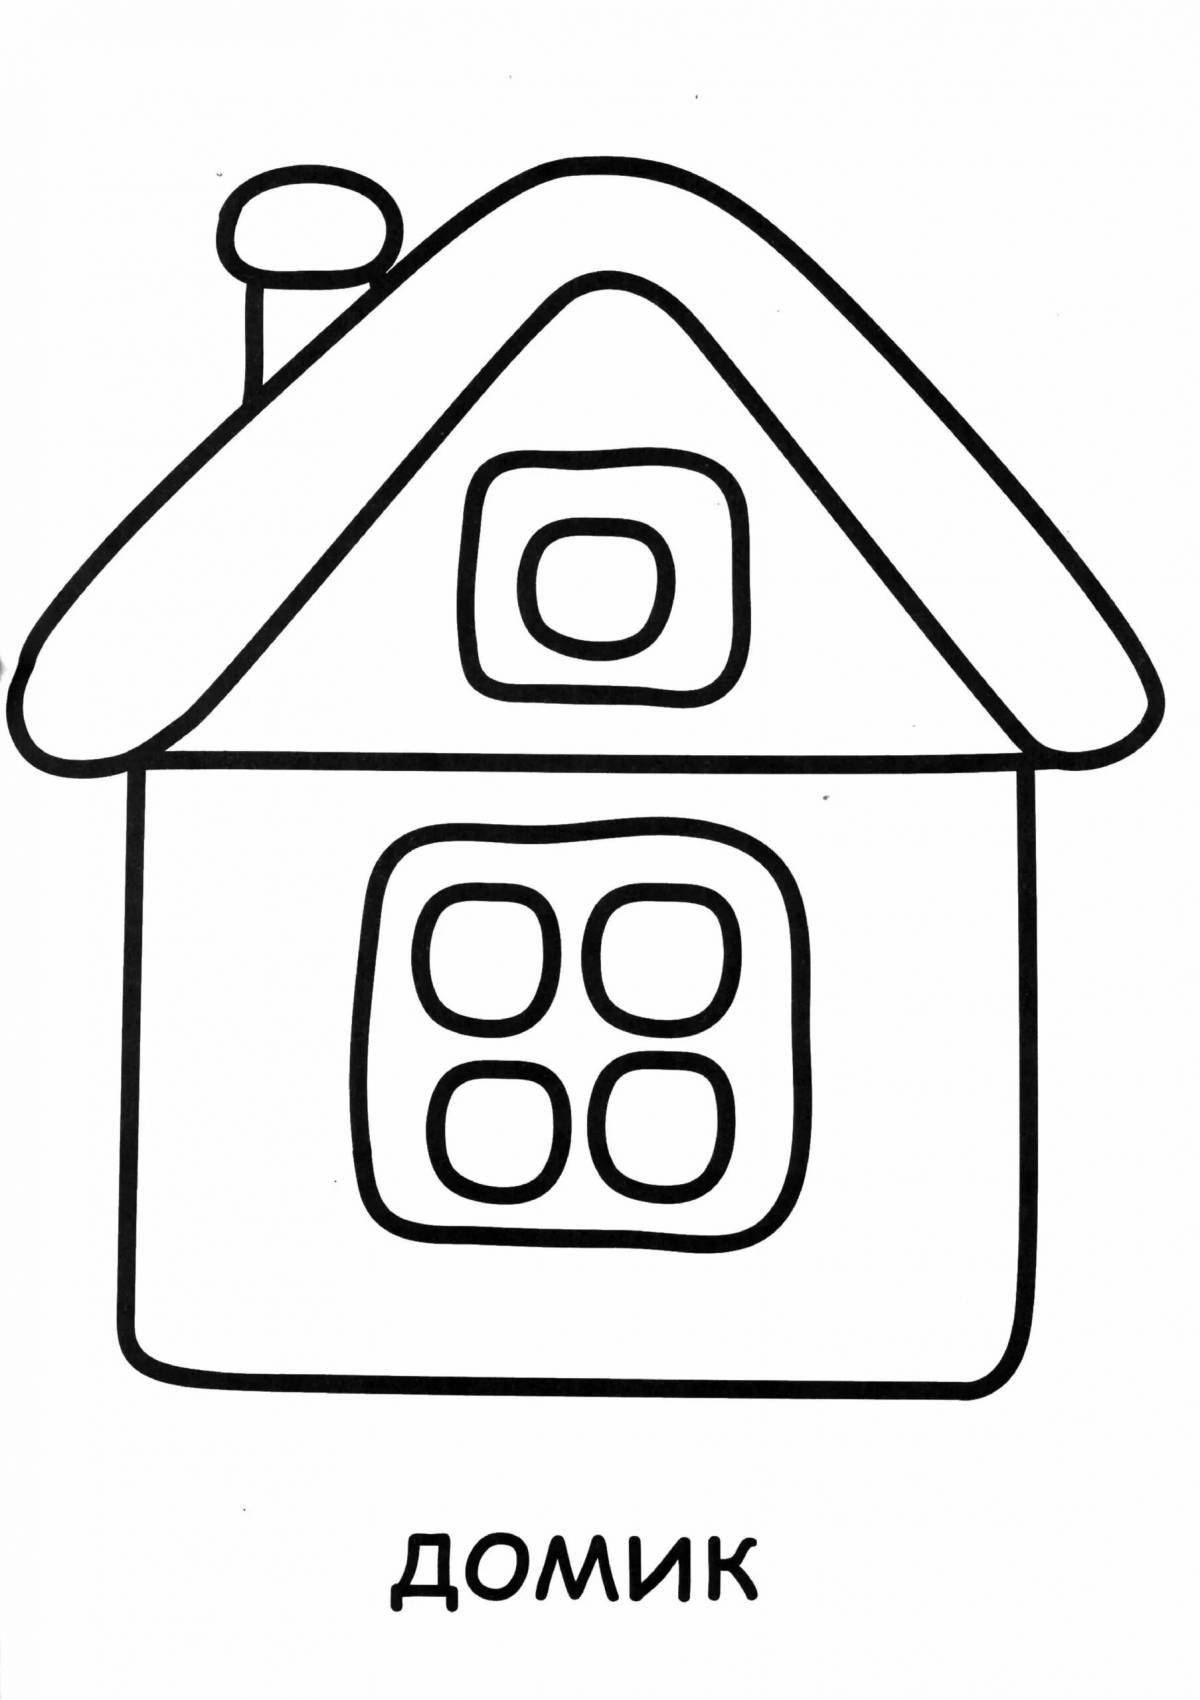 A fascinating educational house coloring book